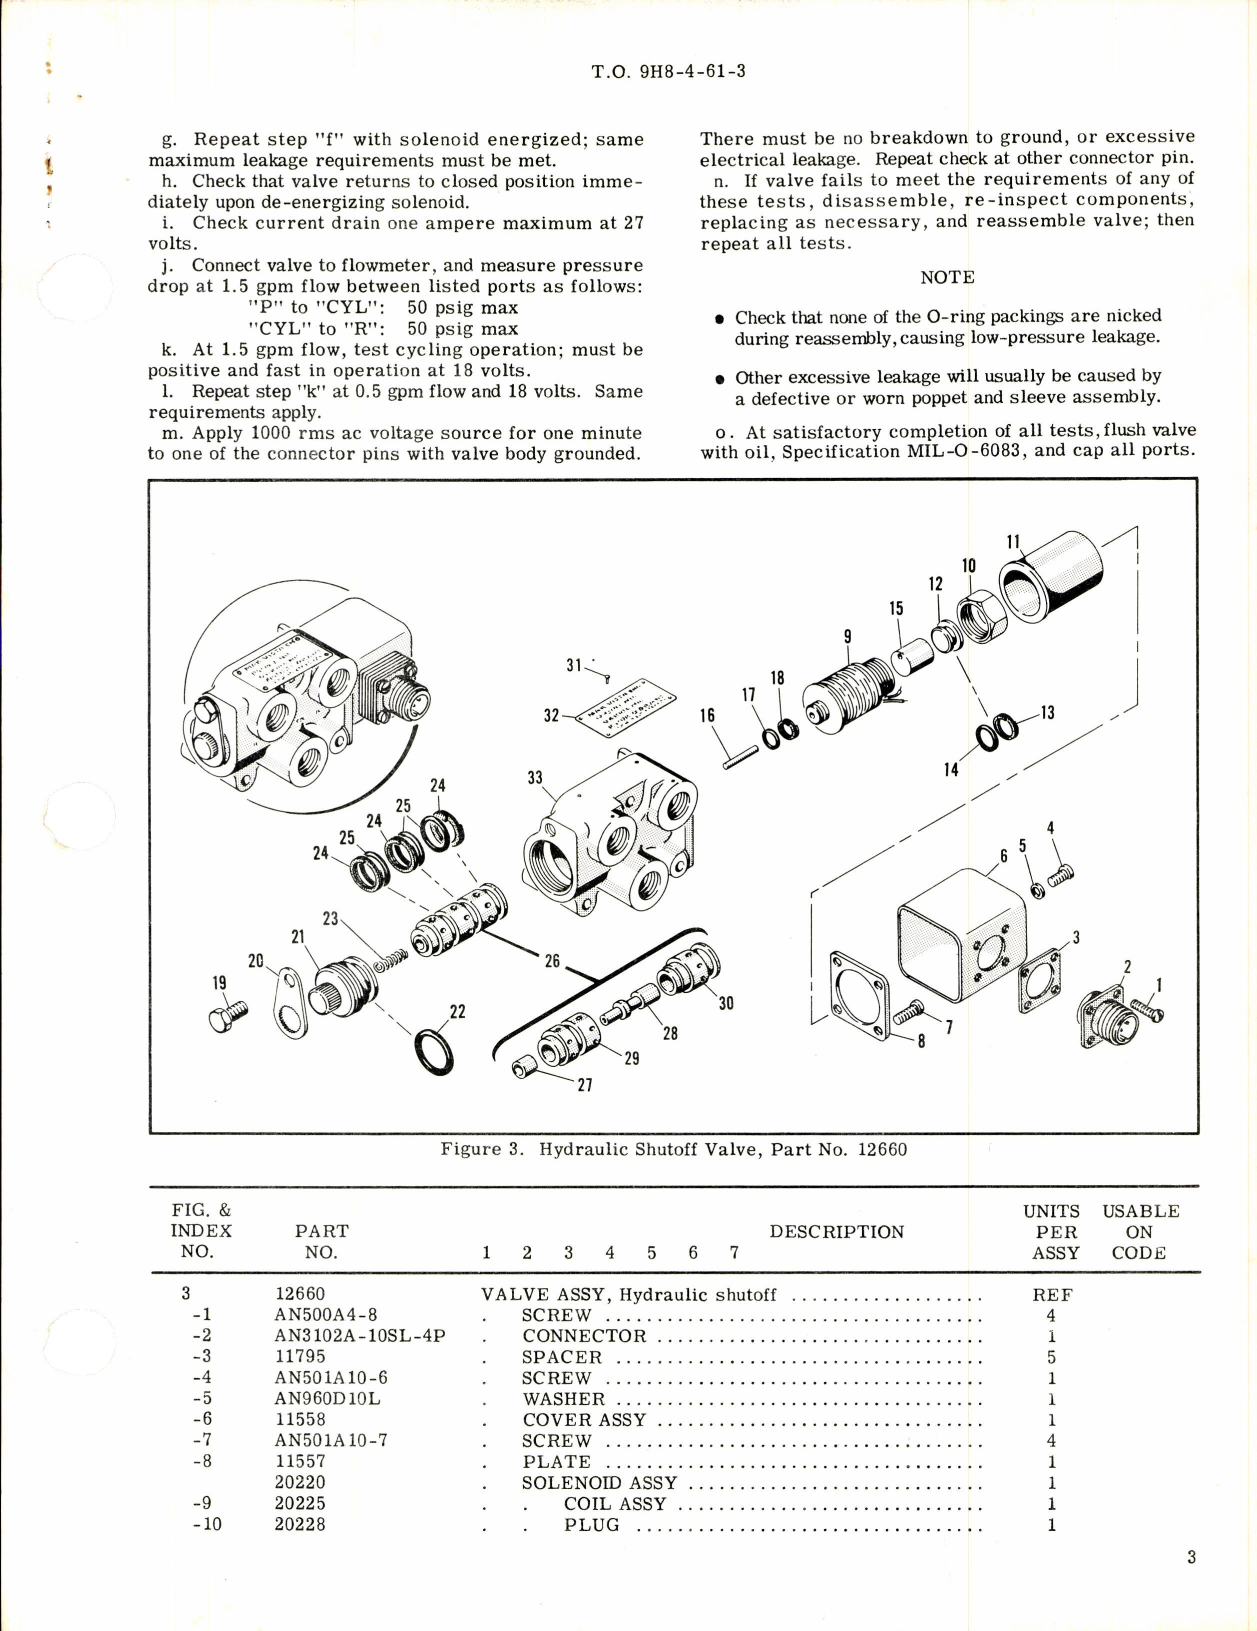 Sample page 3 from AirCorps Library document: Parts Breakdown for Hydraulic Shutoff Valve Part No 12660